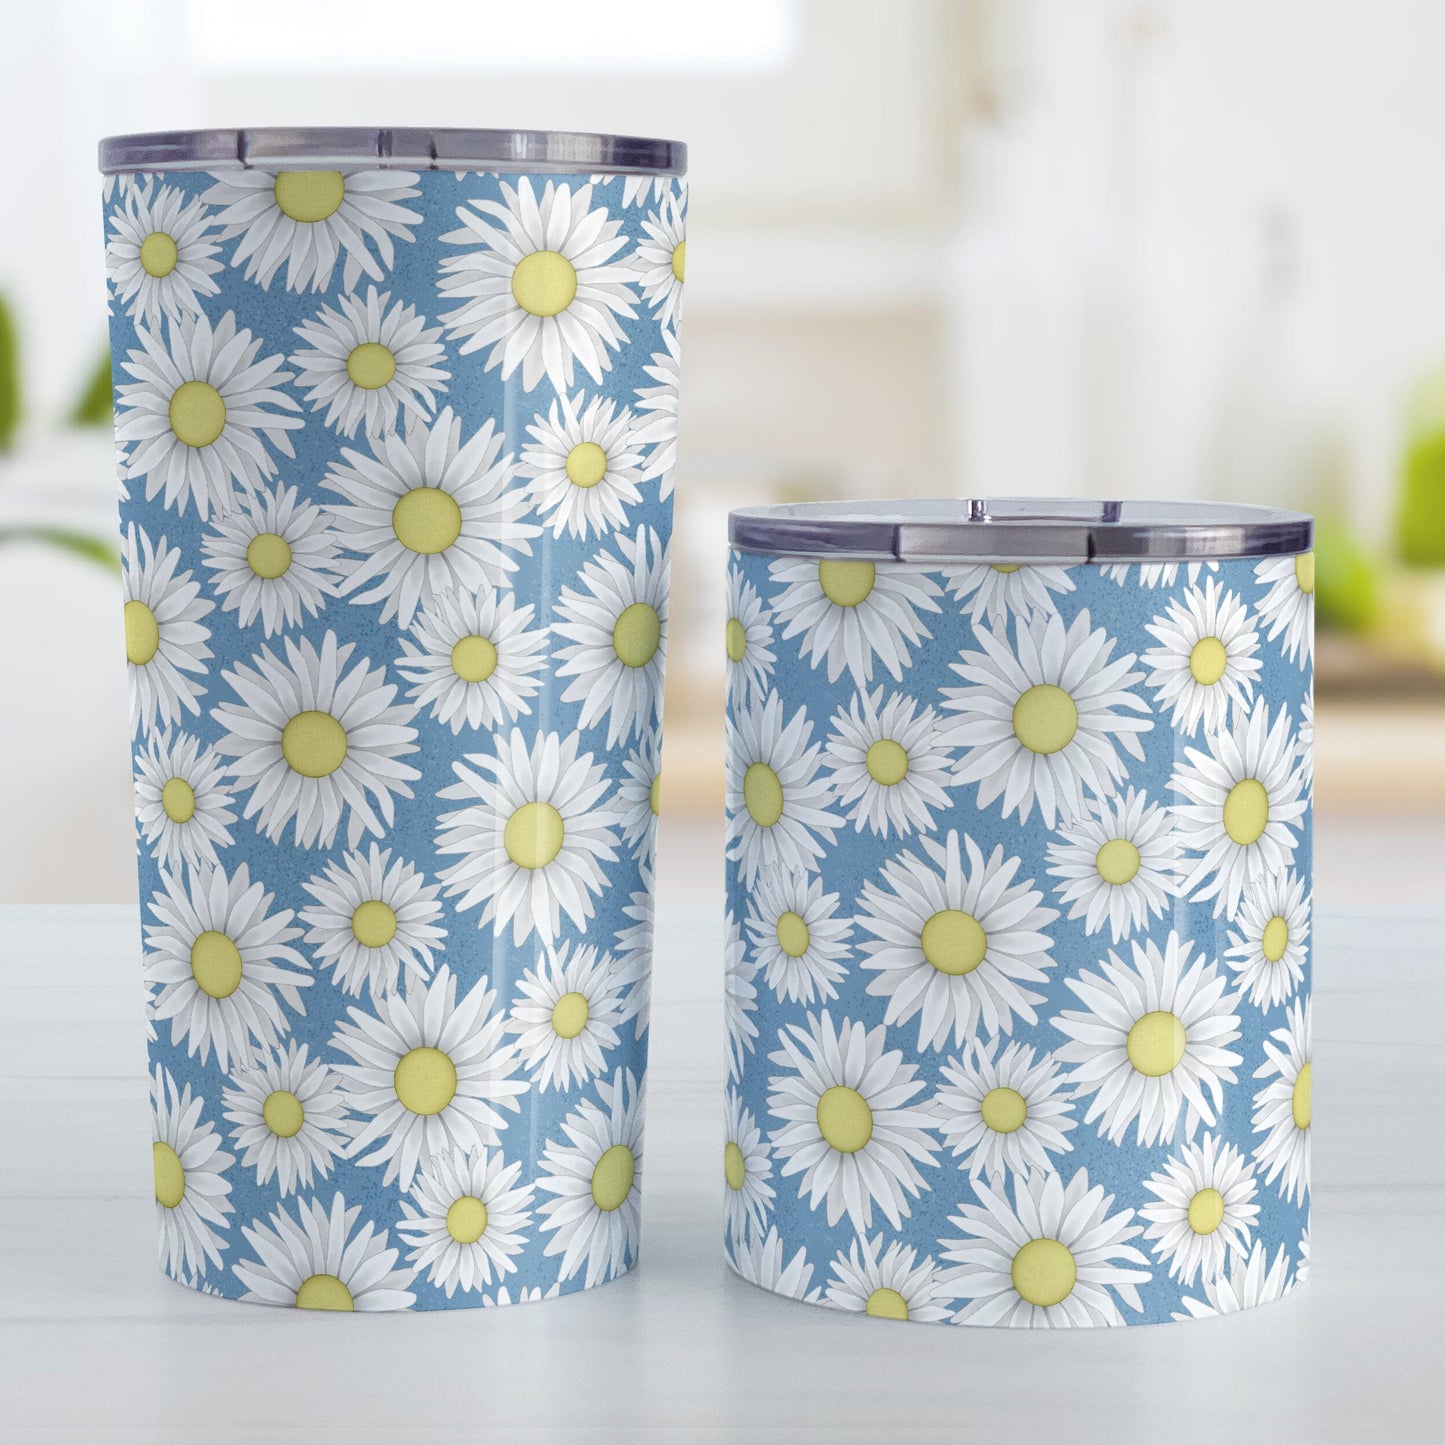 Blue Daisy Pattern Tumbler Cups (20oz or 10oz) at Amy's Coffee Mugs. Stainless steel tumbler cups designed with a pretty pattern of white daisy flowers with yellow centers over a speckled blue background that wraps around the cups. Photo shows both sized cups on a table next to each other. 